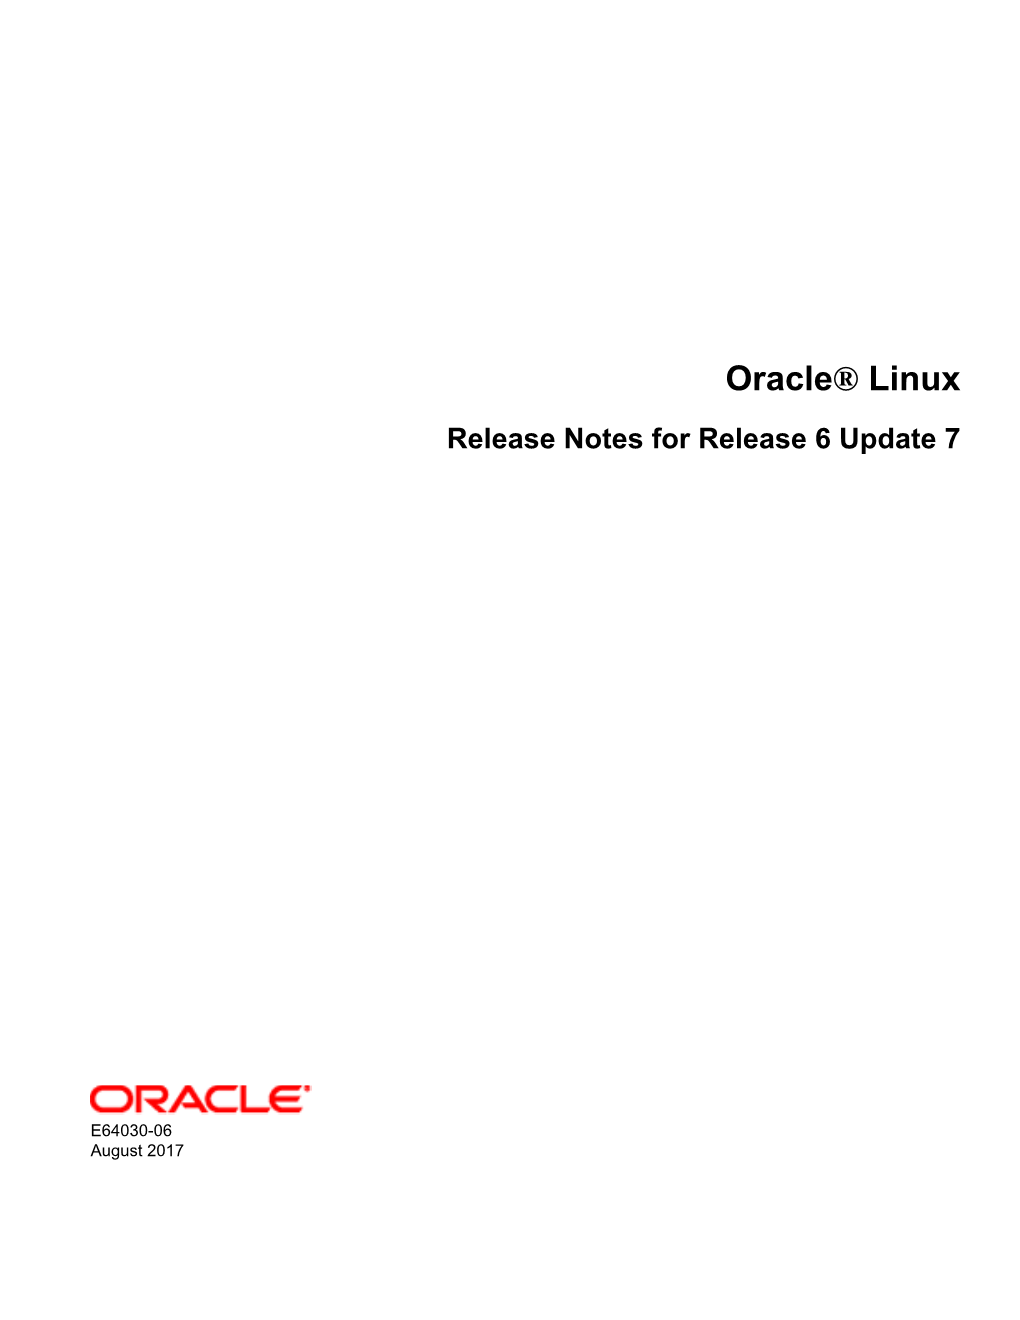 Oracle® Linux Release Notes for Release 6 Update 7